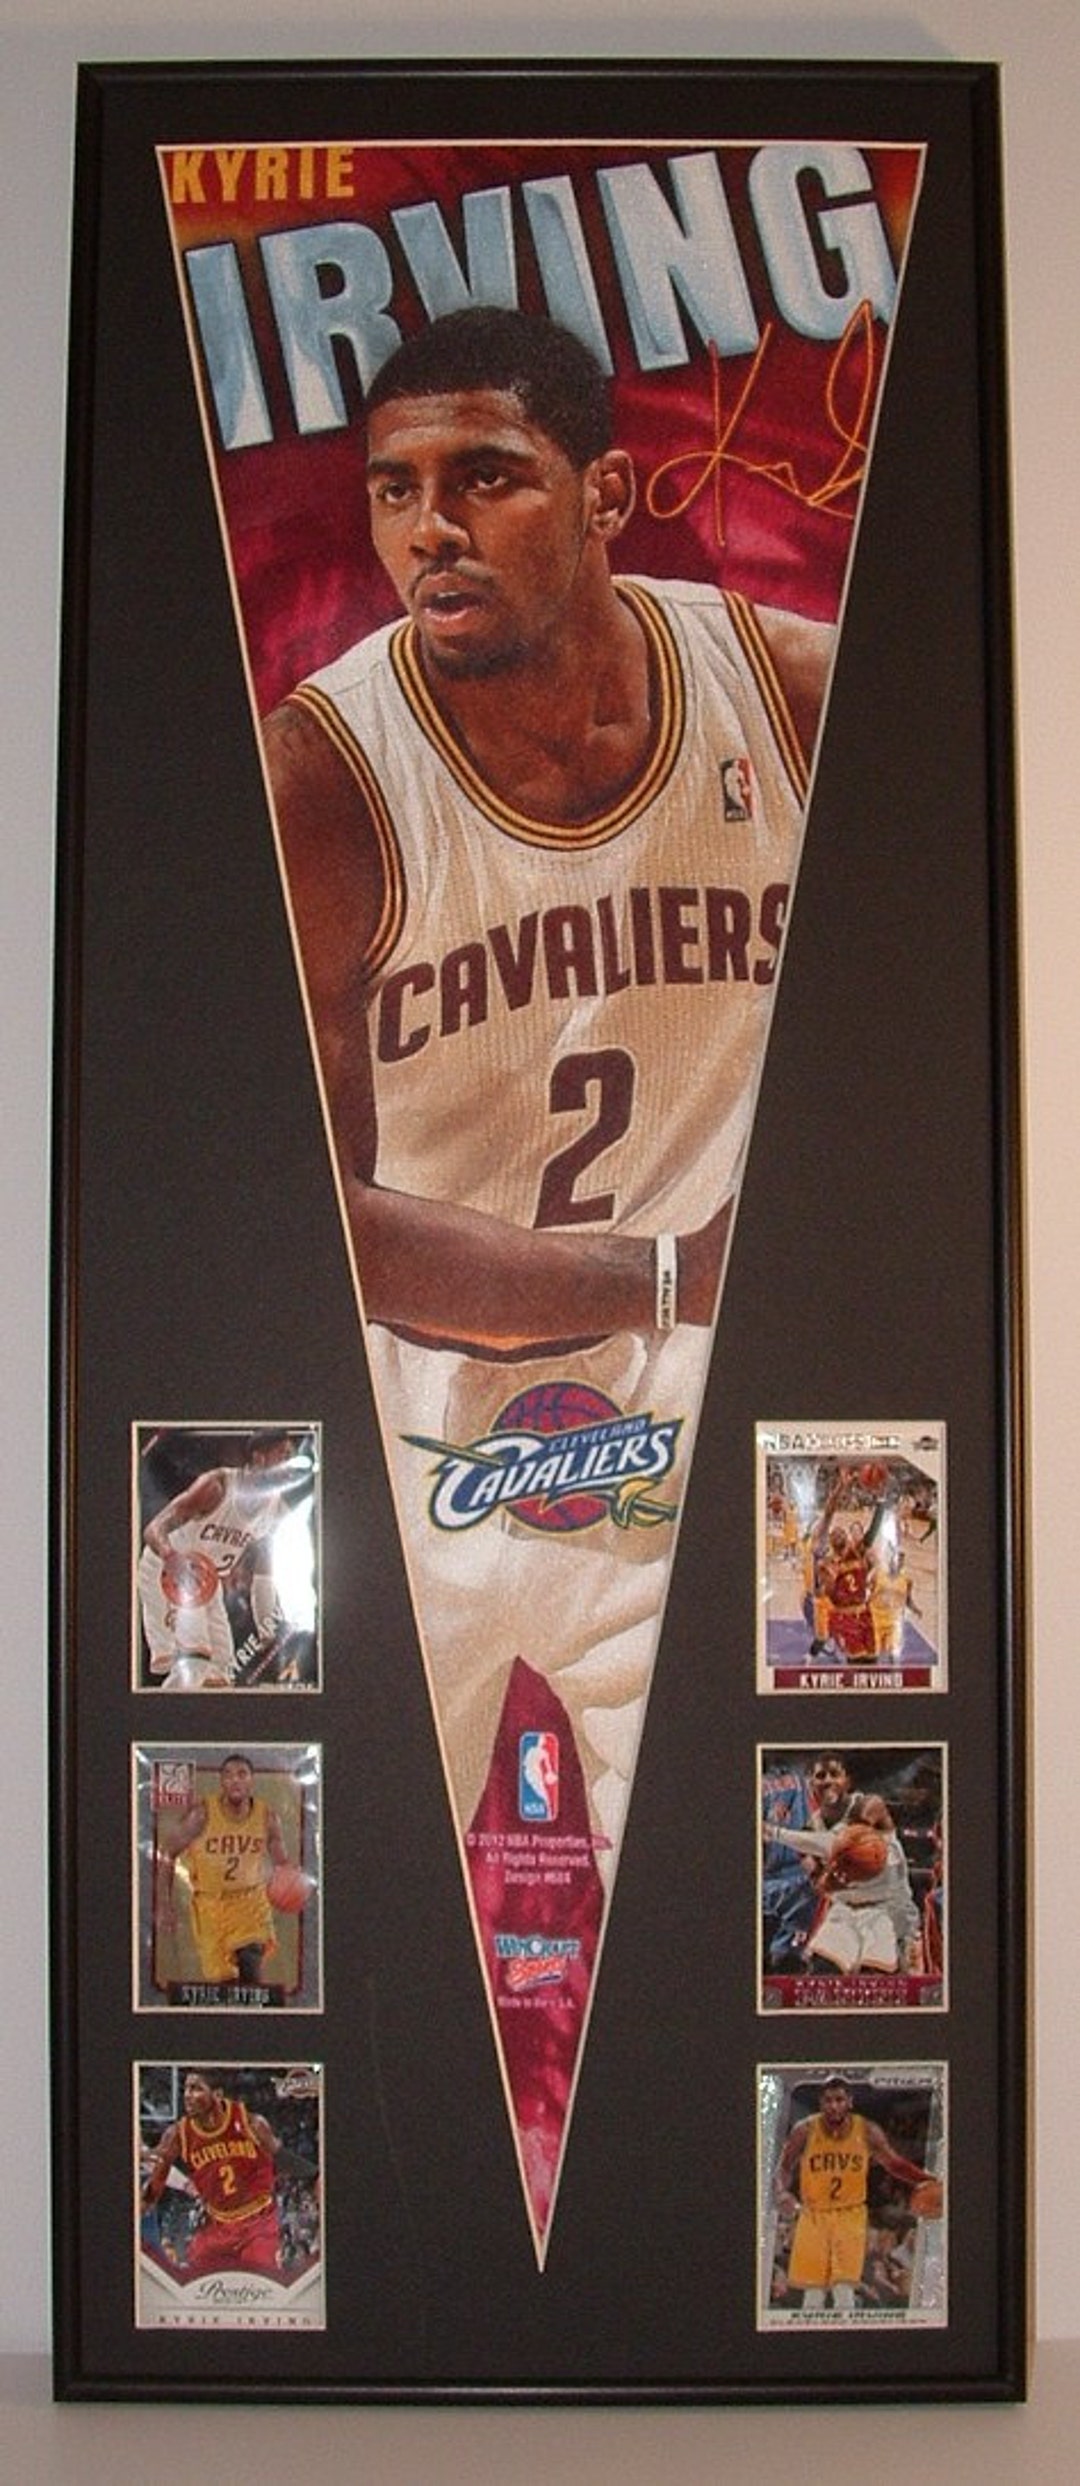 Kyrie Irving Autographed Framed Cavaliers Jersey